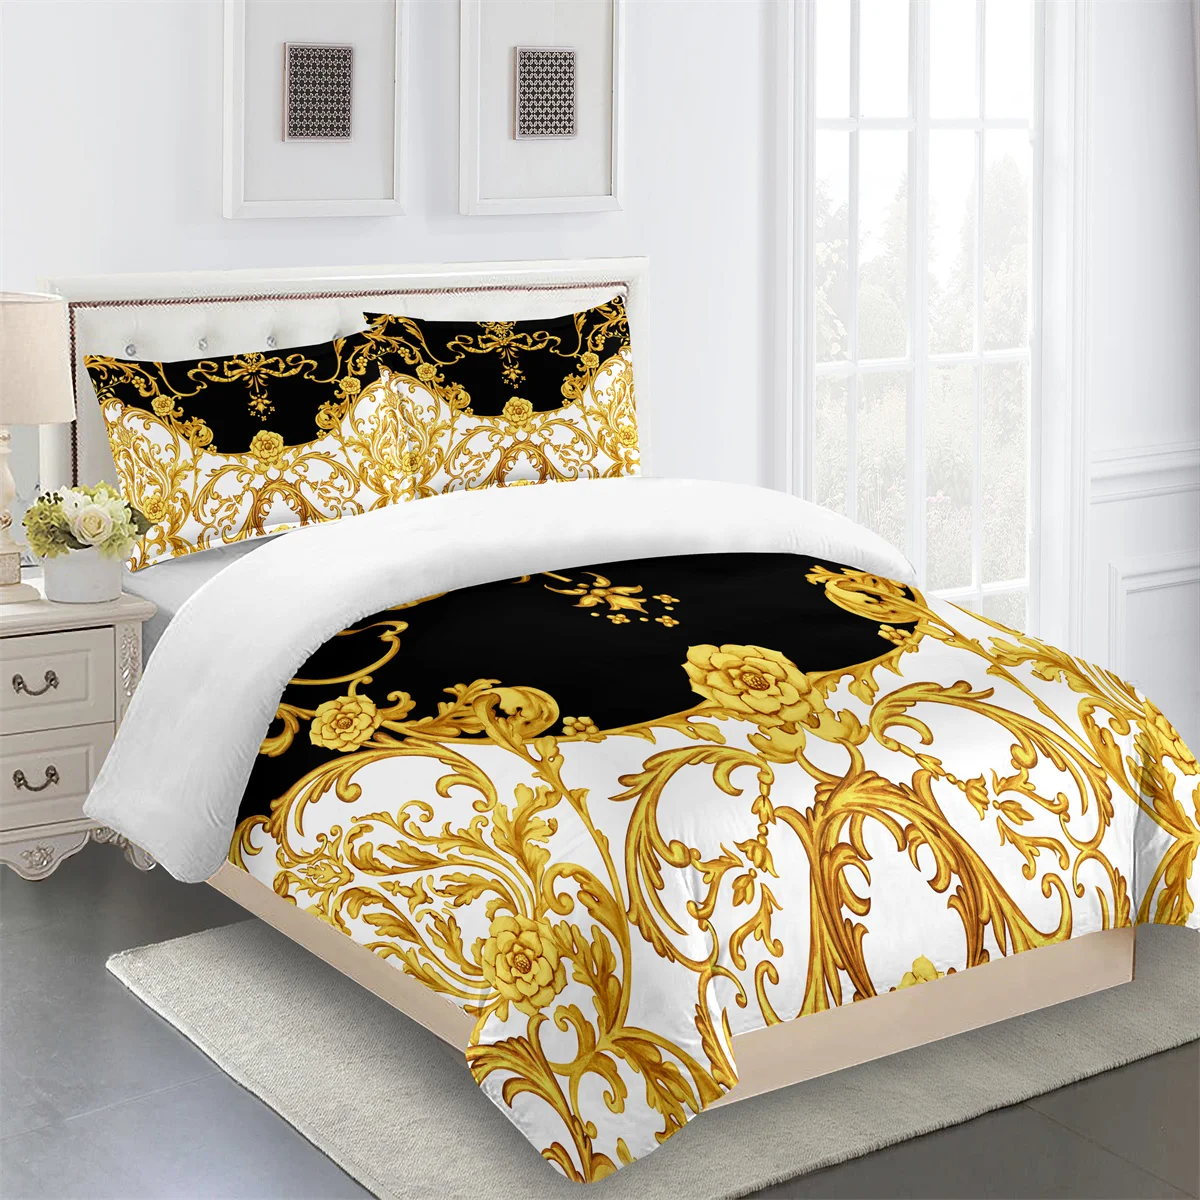 

Luxury Brands Designer Modern Baroque King Queen Twin Full Bedding Sets Single Double Bed Duvet Cover Set and 2 pcs Pillow cover